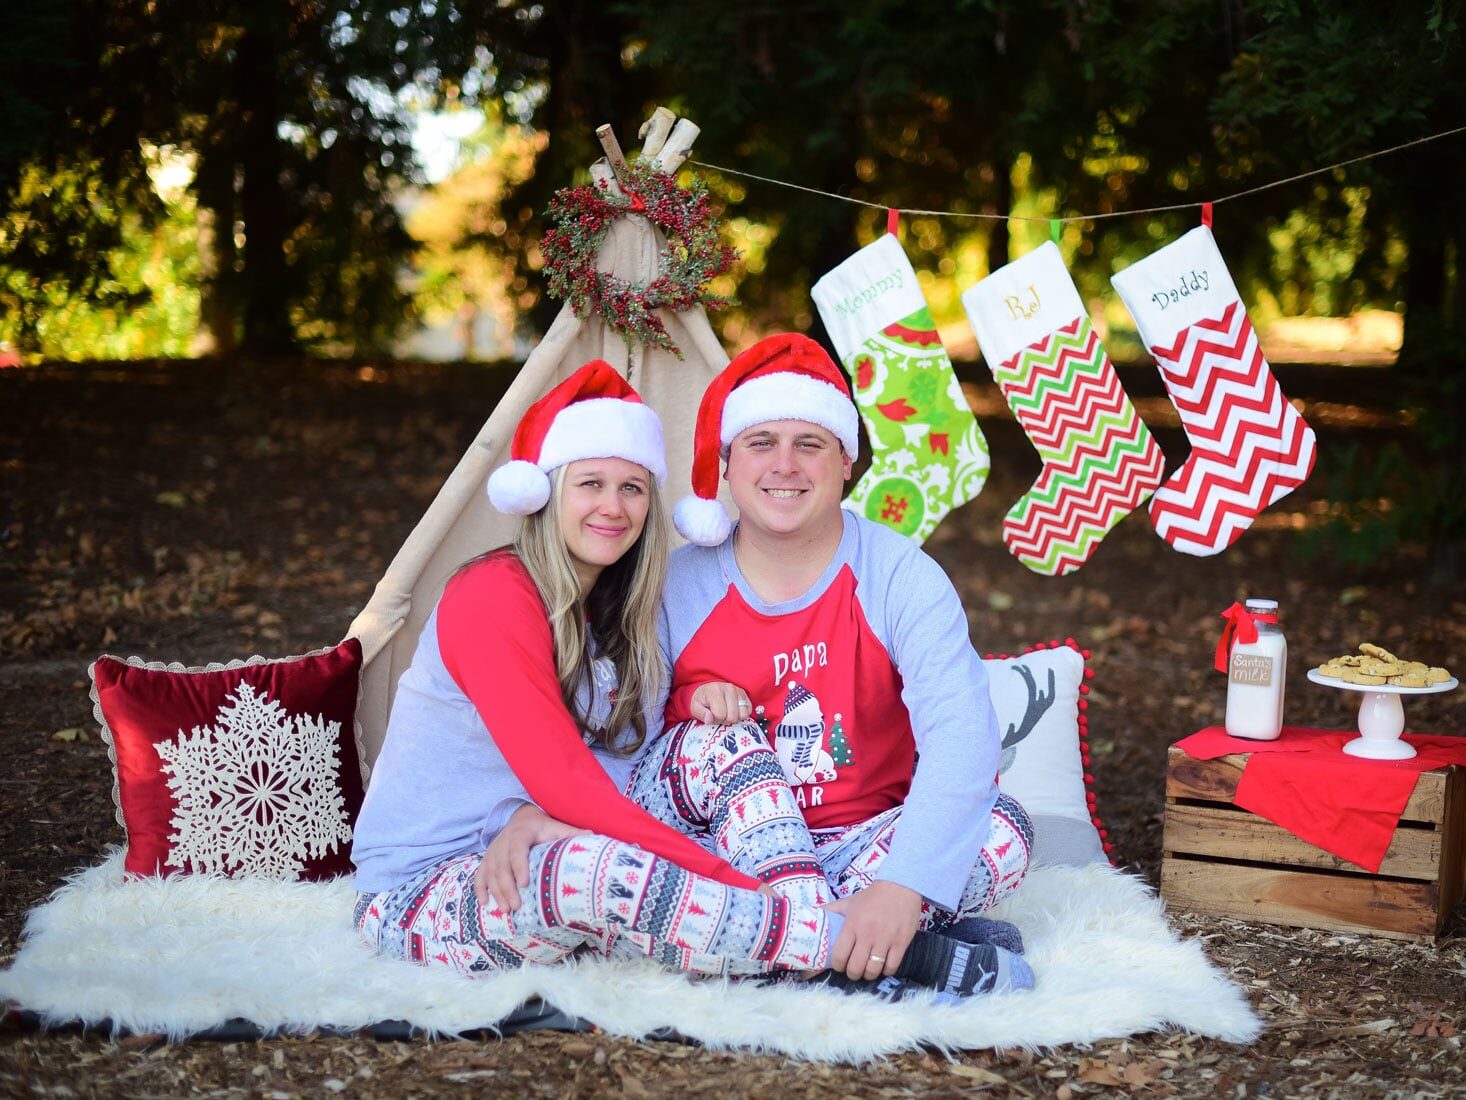 Christmas card ideas that take place outside in front of a tent | The Dating Divas